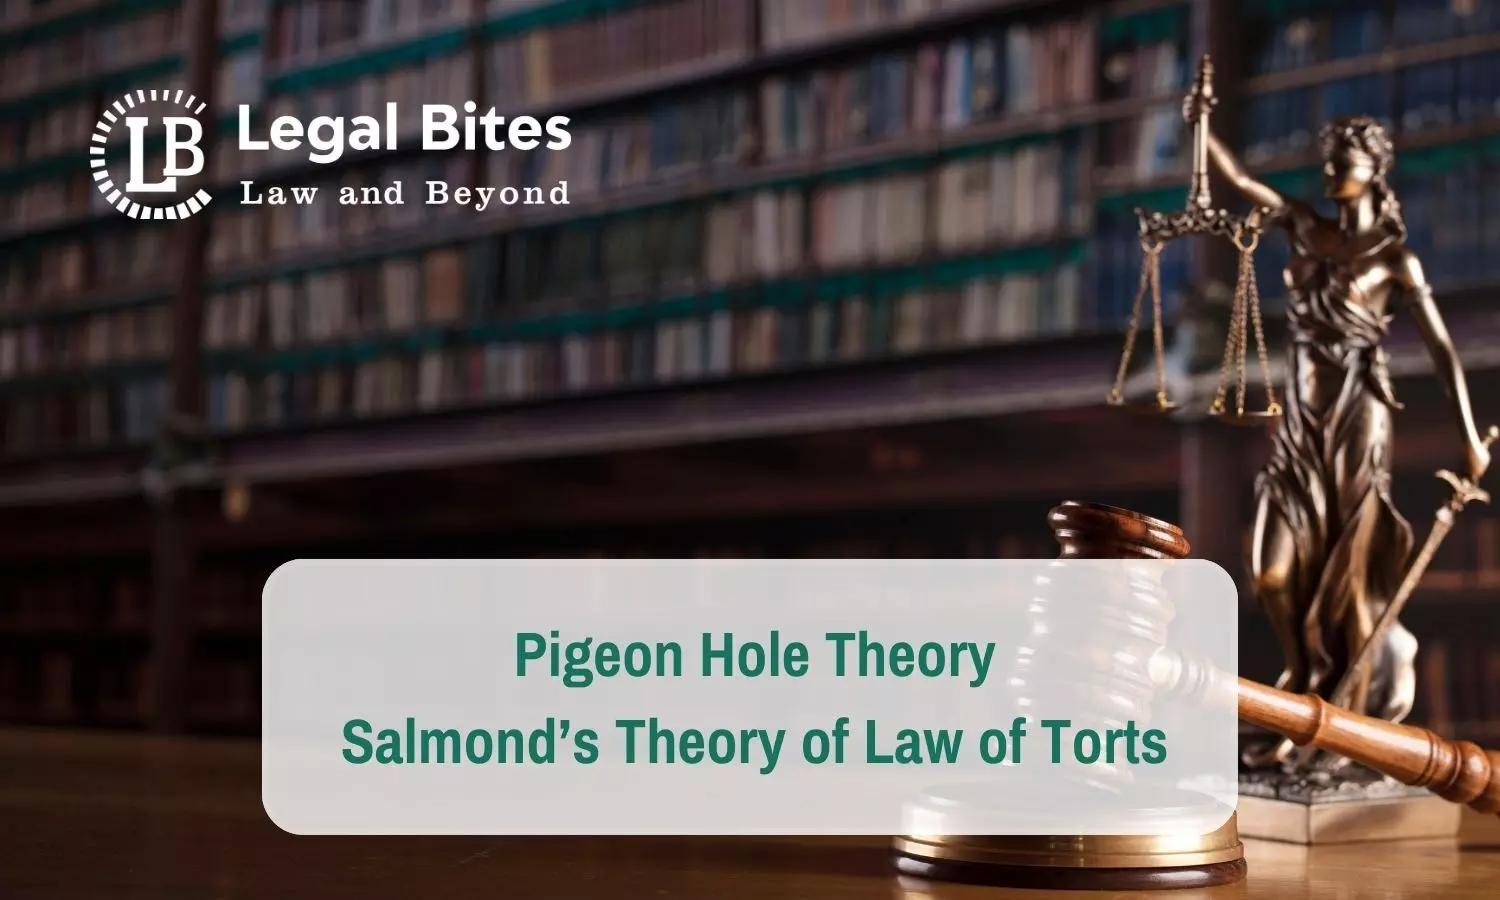 Pigeon Hole Theory– Salmond’s Theory of Law of Torts